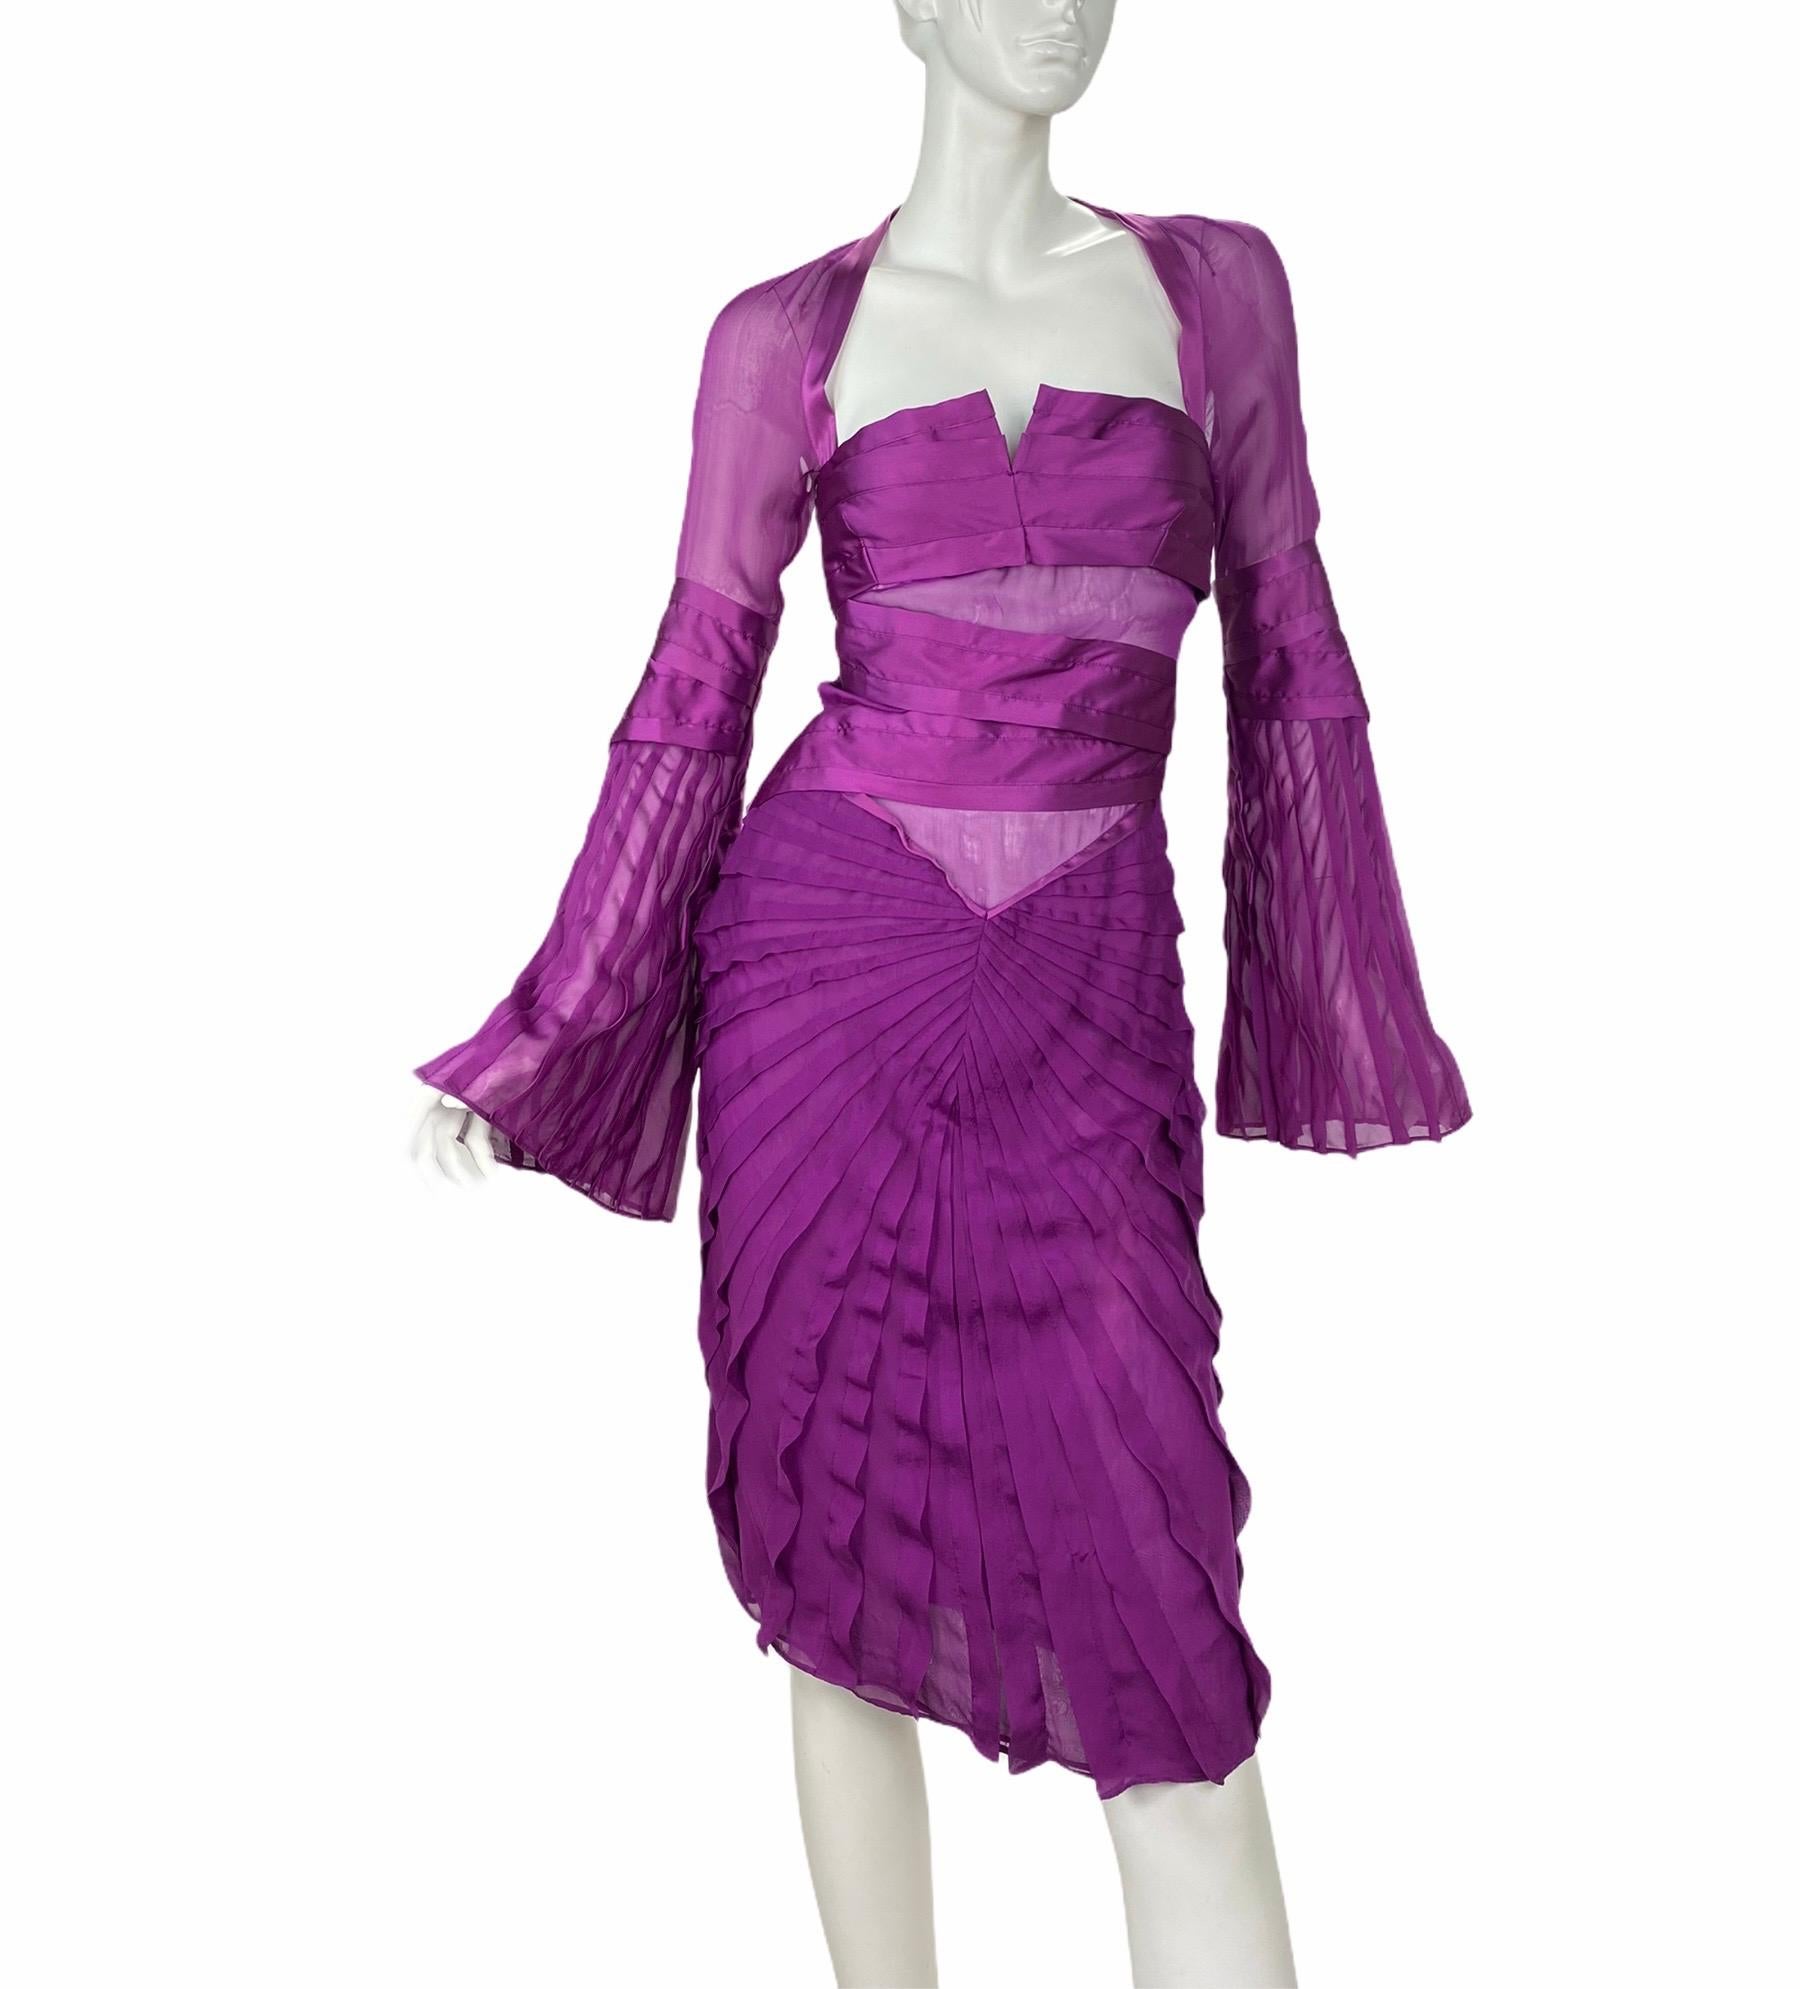 GUCCI SILK DRESS

Designed by Tom Ford for his final GUCCI F/W 2004 ready-to-wear collection.
Look #27

The most seductive and romantic dress ever!

Condition: Excellent

Size: 42 - US 6

100% Silk